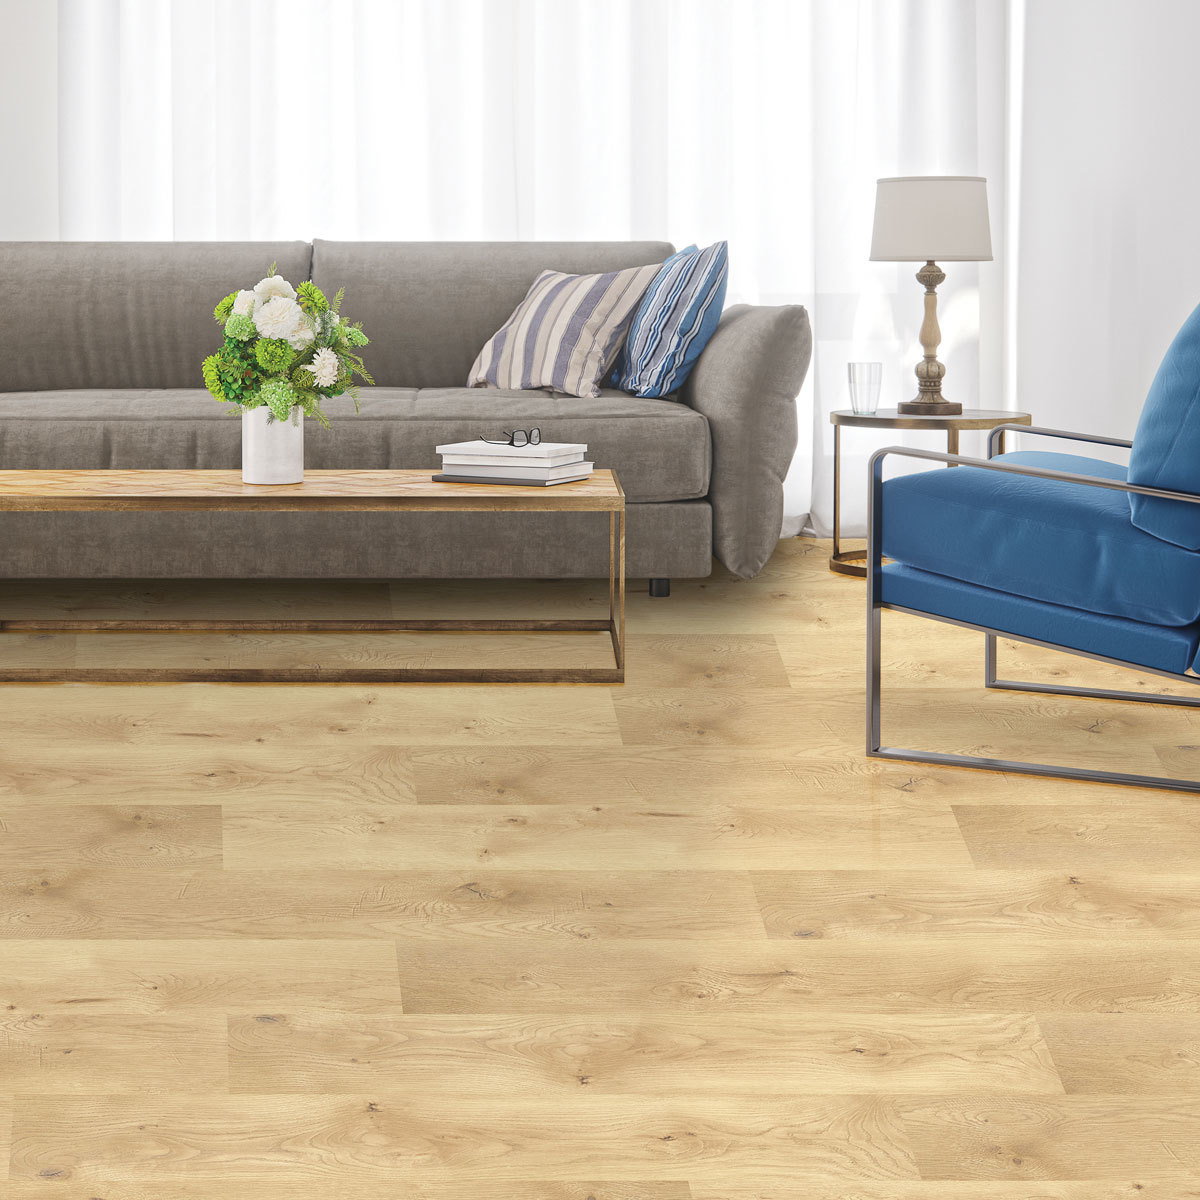 Lifestyle image of flooring used in living room setting